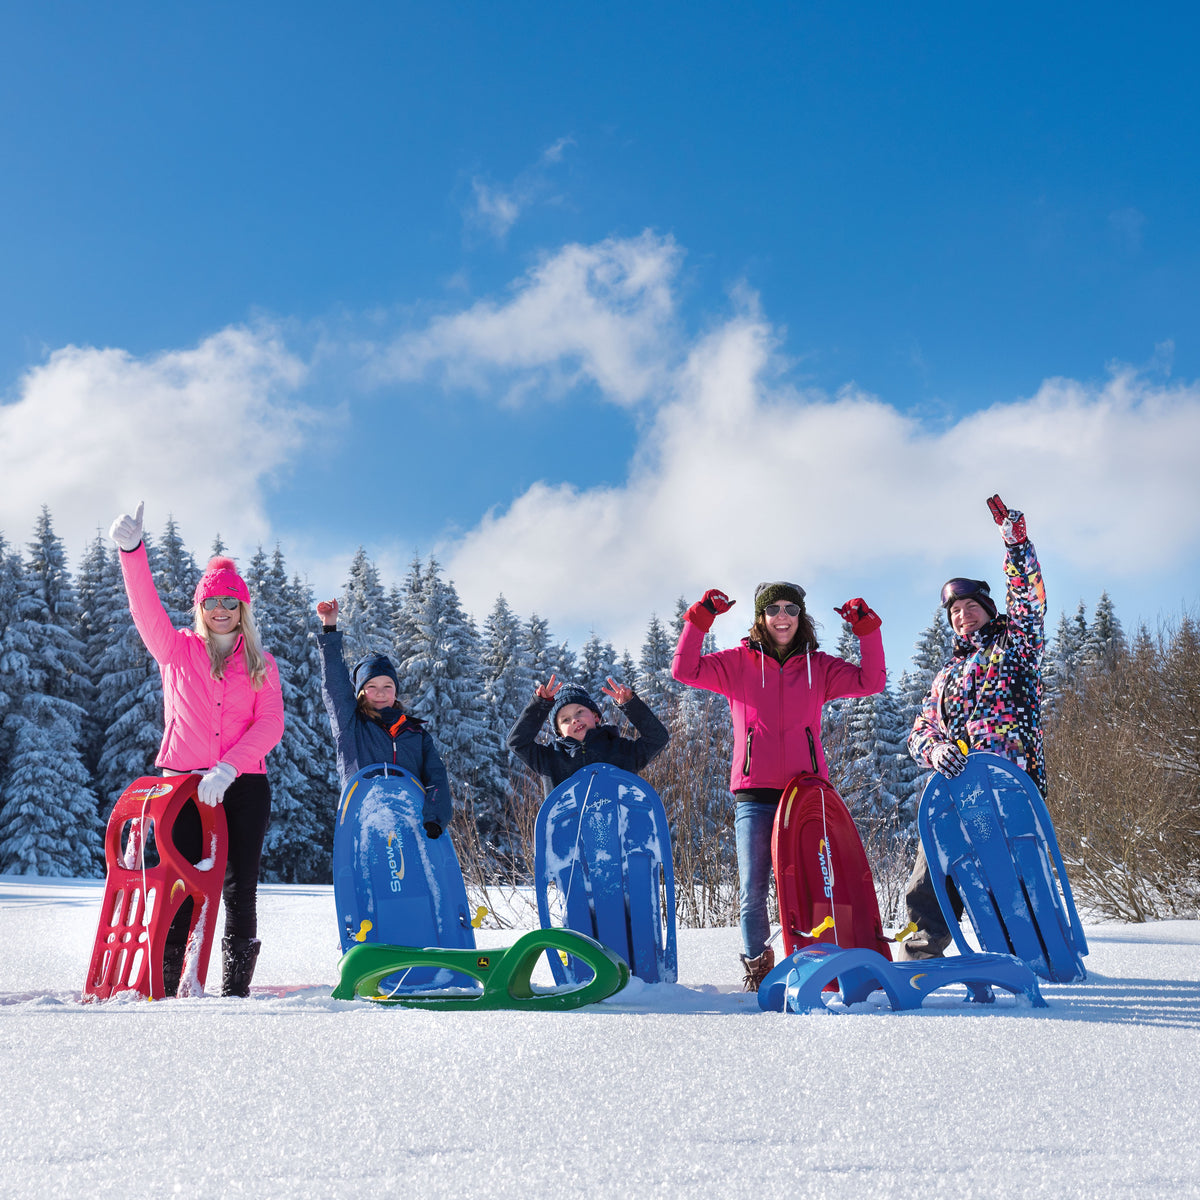 Dominate The Slopes With A KETTLER Snow Sled! Built to last for a lifetime of winter fun, our sleds will blast past the others leaving a spray of snow in its wake. A fun, timeless way to enjoy the snowy weather.